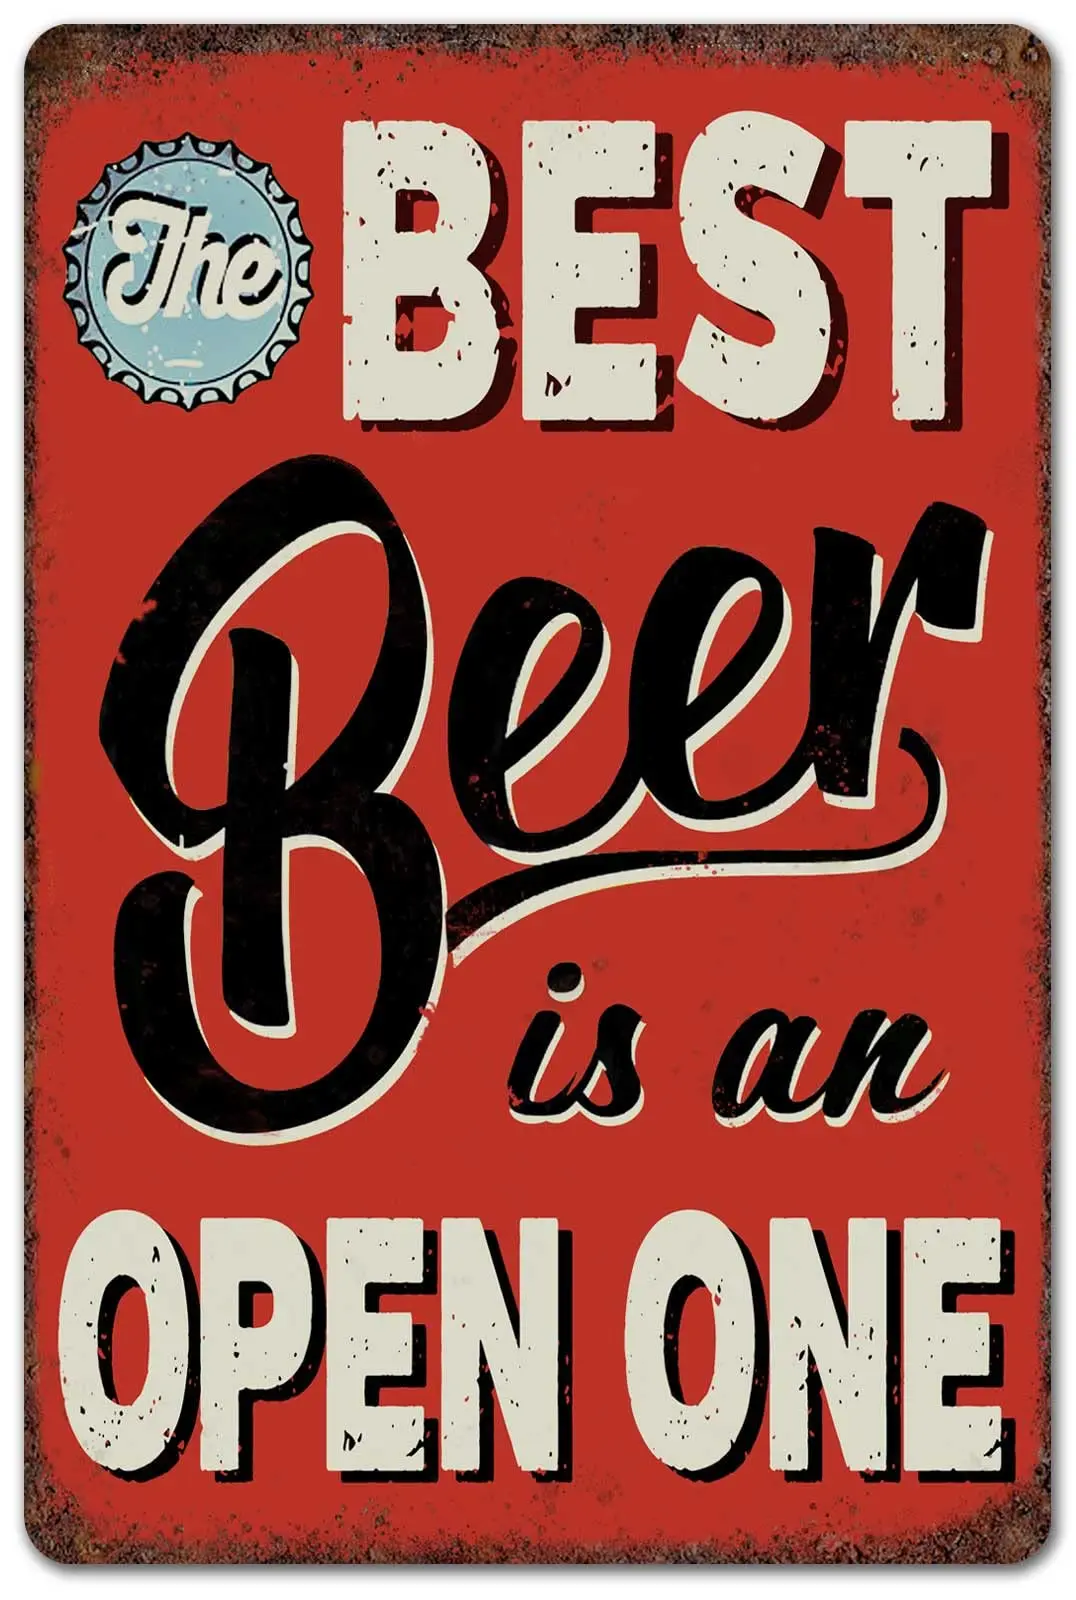 

CrazySign Man cave Vintage Metal Sign The Best Is An Open Sign Home Bar Signs Wall Decor (234)